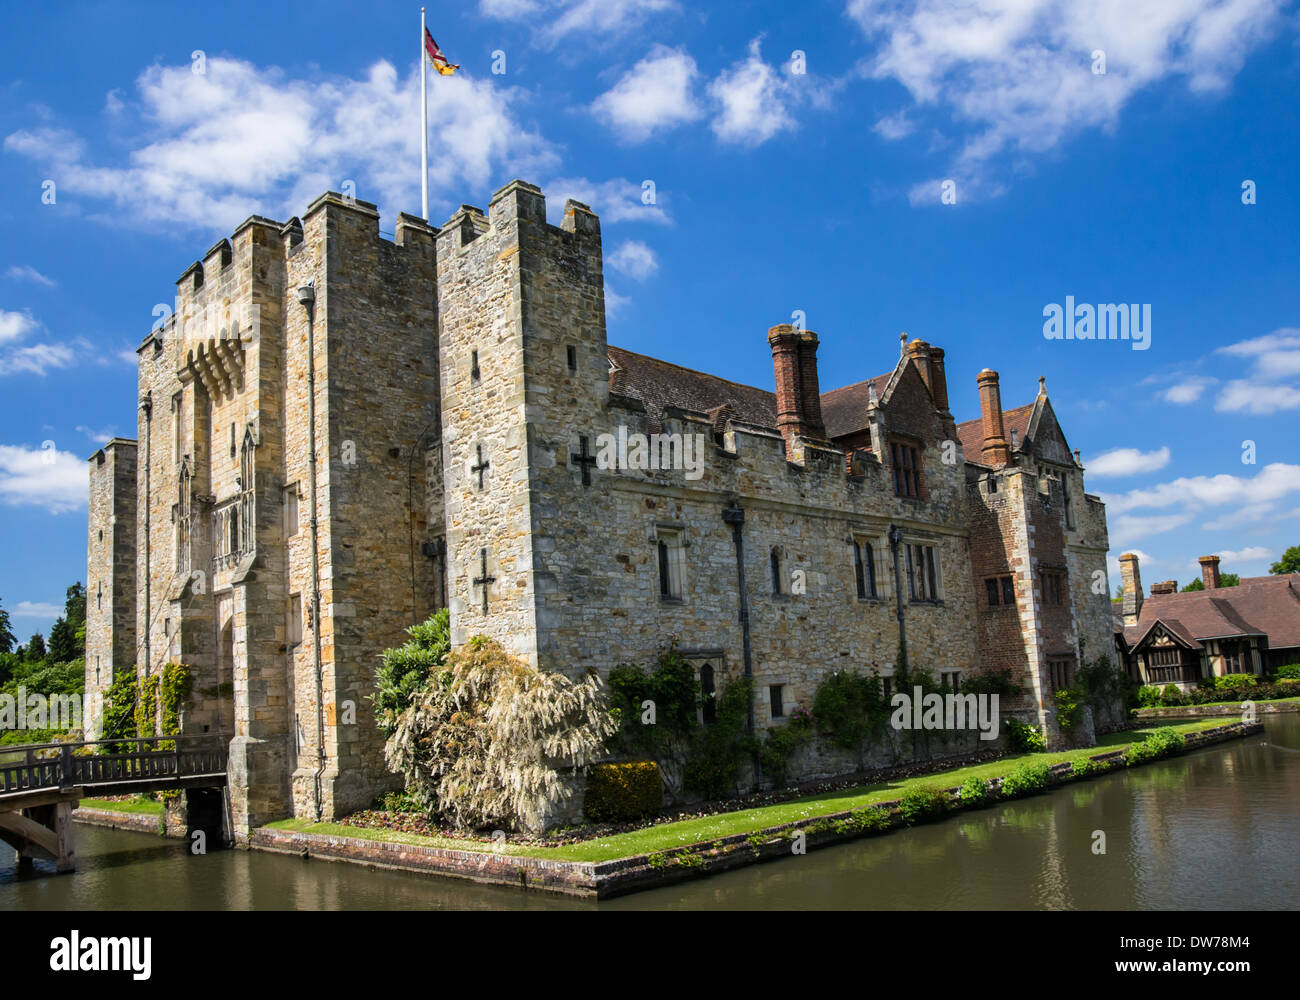 Hever Castle in the village of Hever Kent England United Kingdom, UK Childhood home of Anne Boleyn, second wife of King Henry VIII Stock Photo